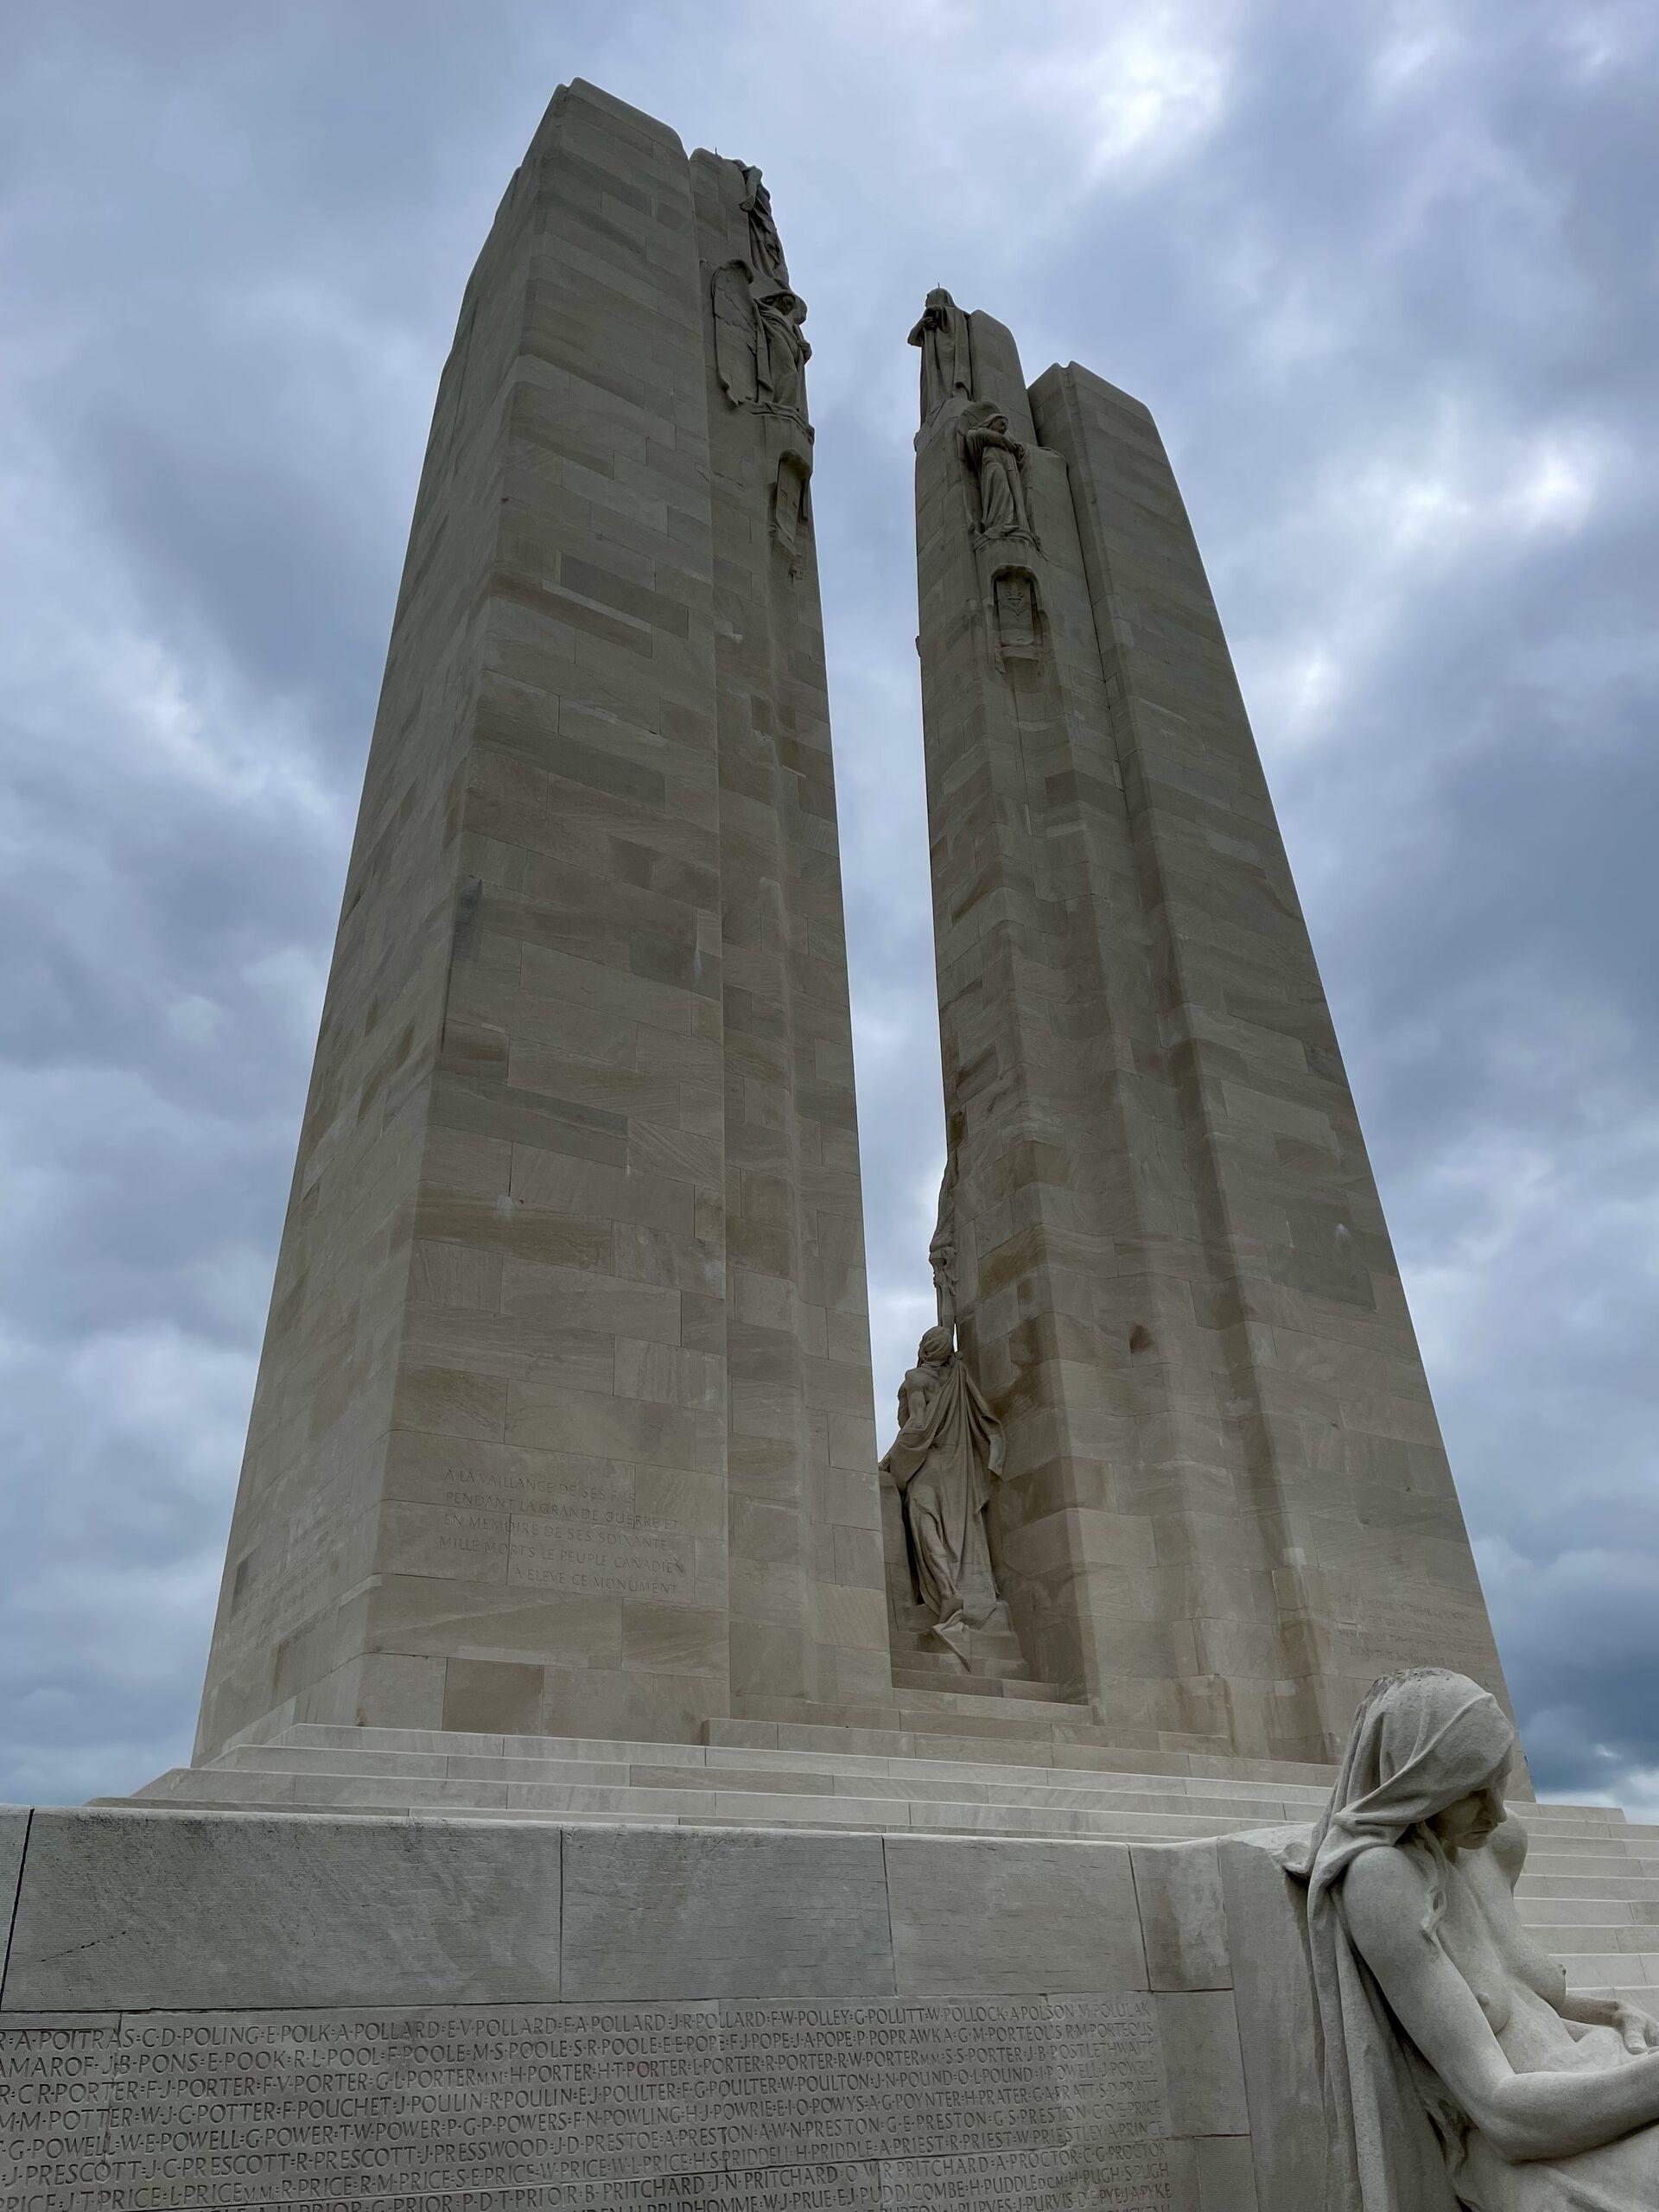 The massive white stone memorial at Vimy Ridge, where the Canadians overcame the Germans on the ridge